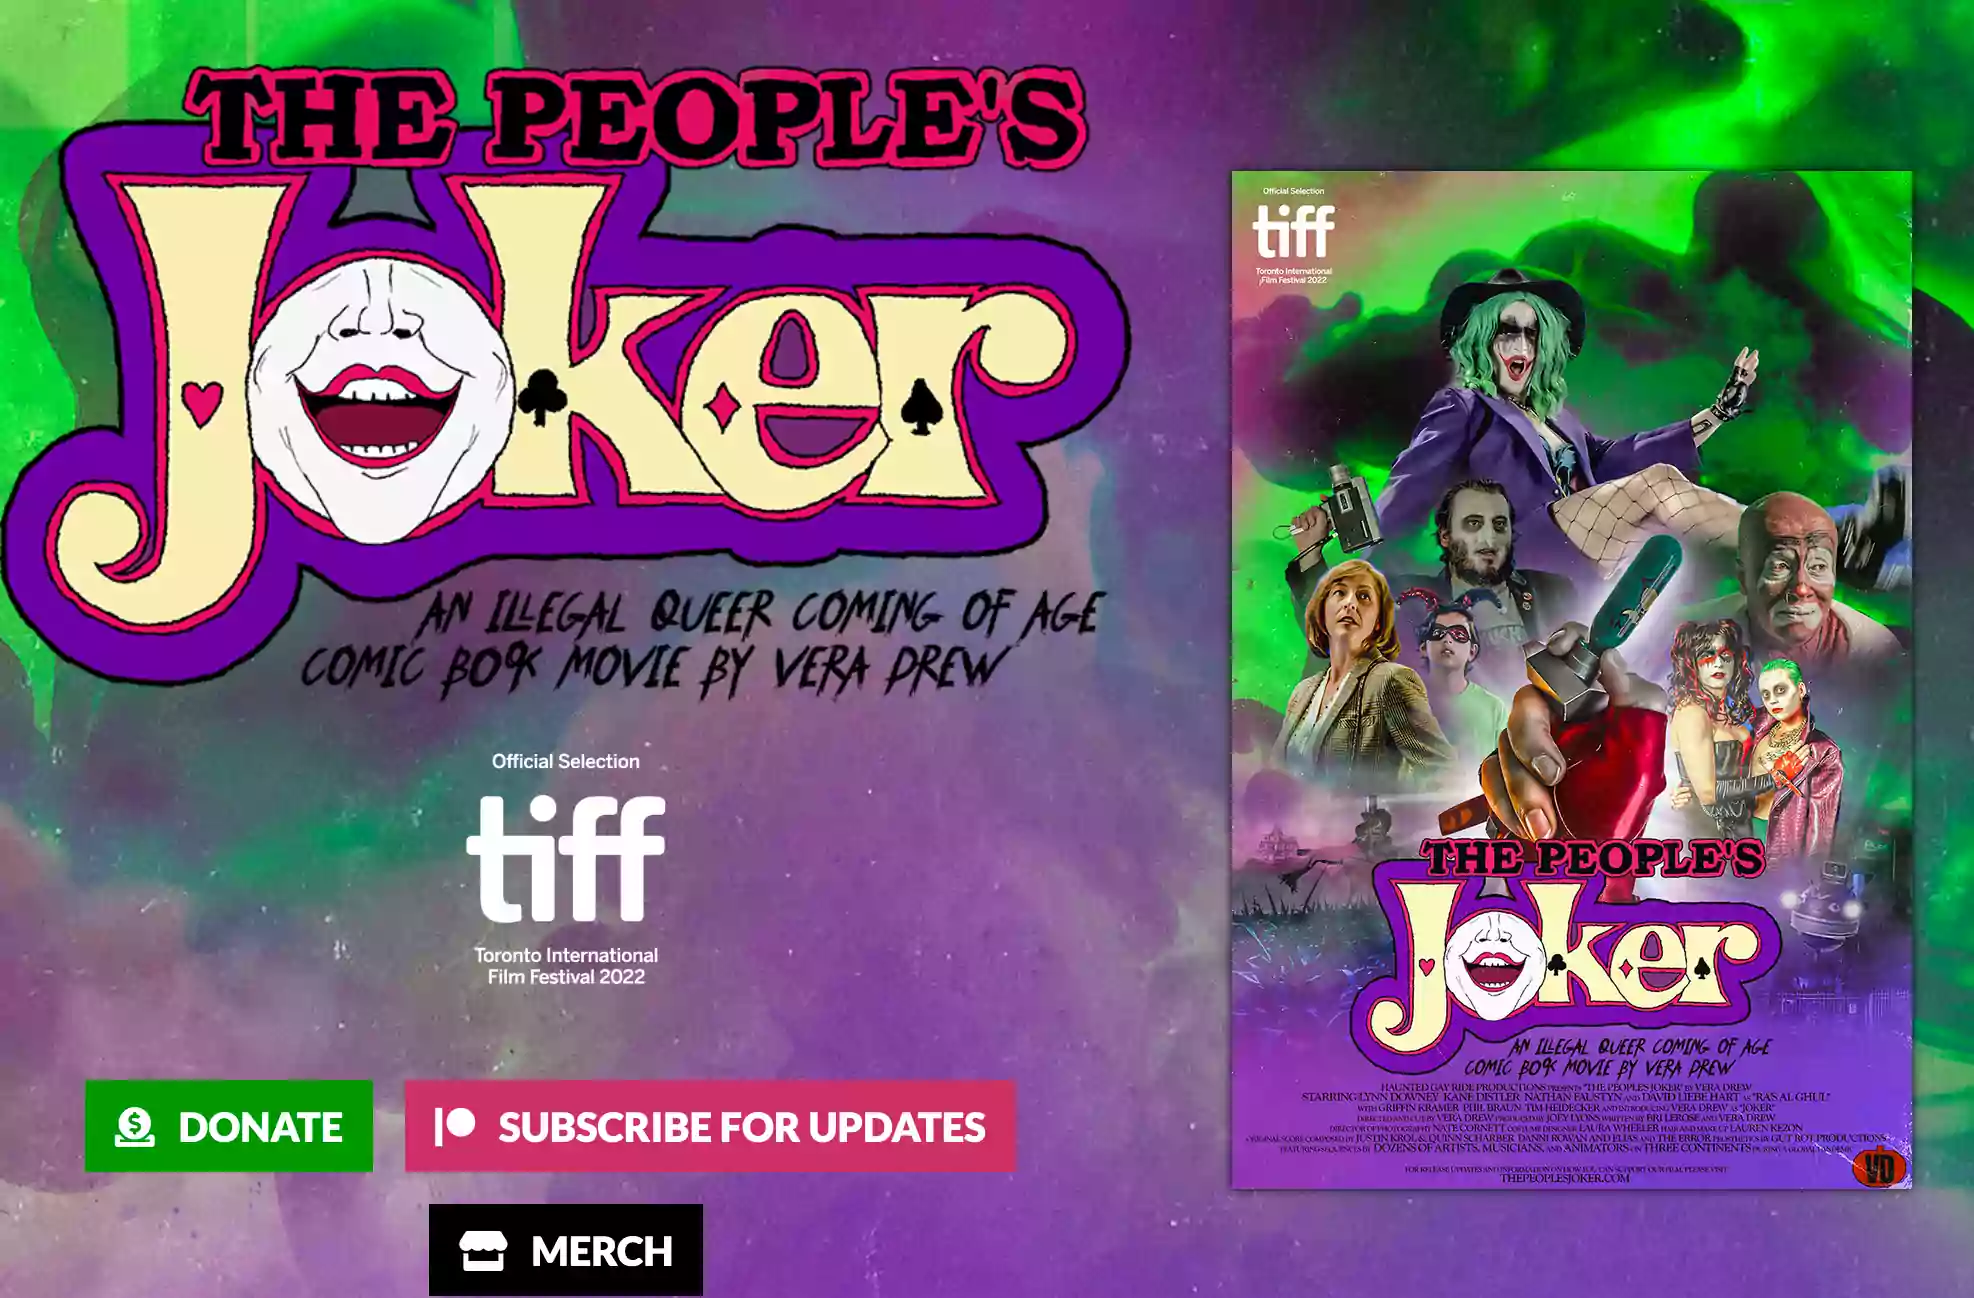 Screen cap of The People's Joker website, showing the movie poster. Cast of characters arranged around a fist with red vinyl fingerless glove gripping an inhaler canister of laughing gas. 